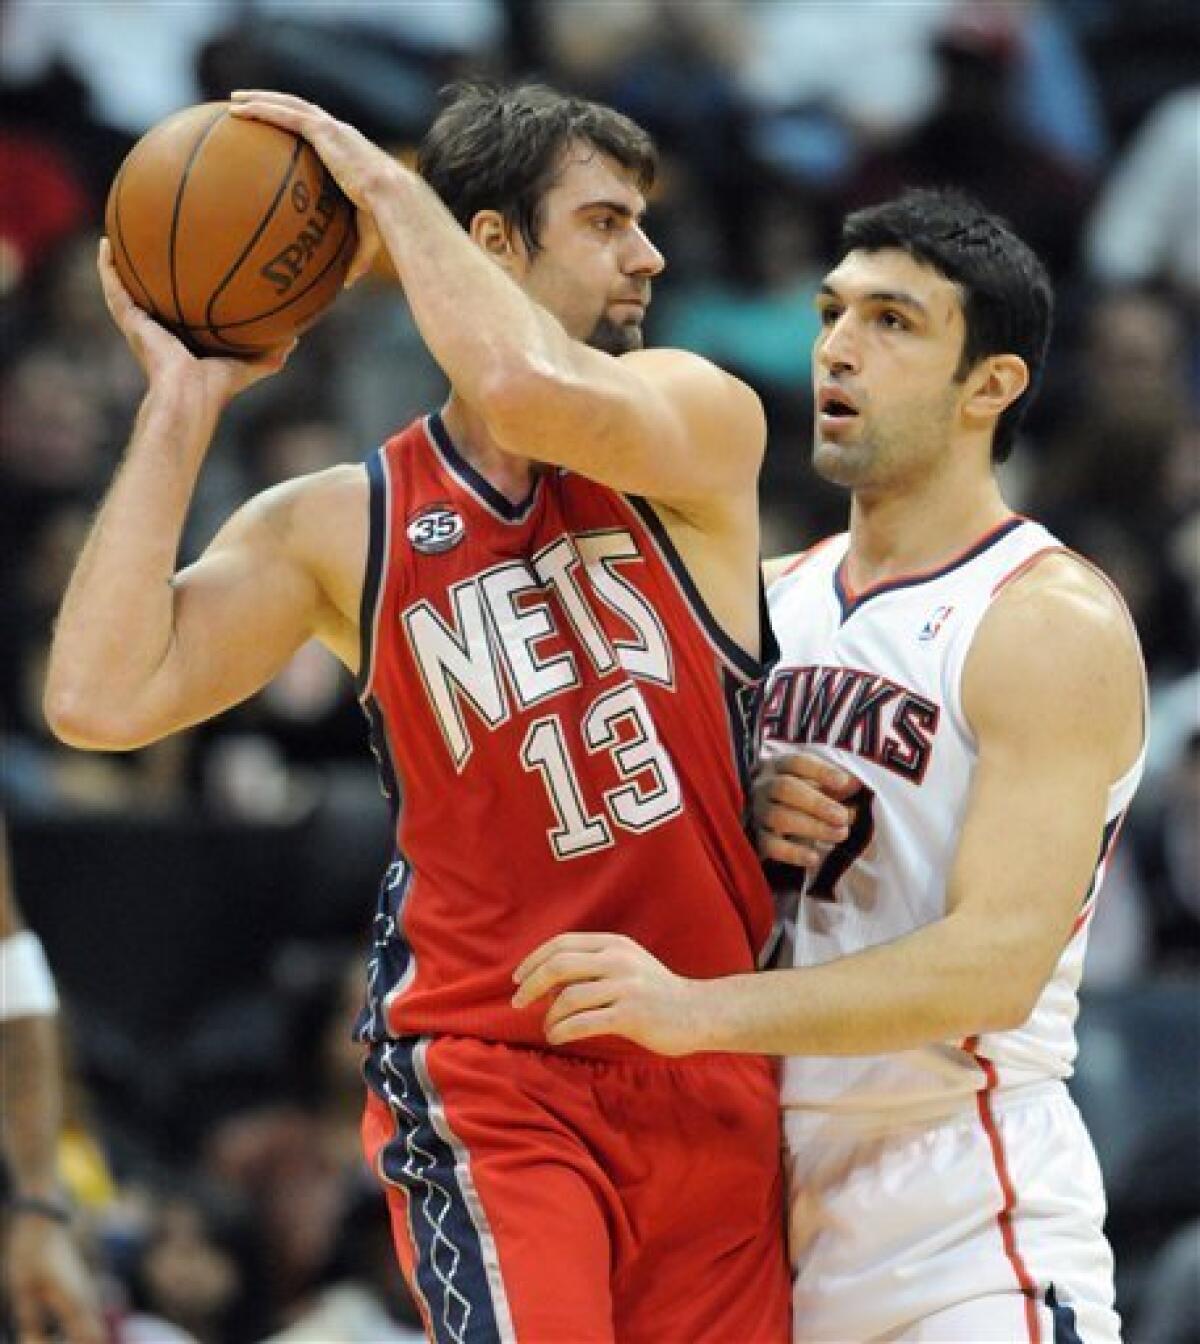 New Jersey Nets center Mehmet Okur, left, of Turkey, keeps the ball away from Atlanta Hawks center Zaza Pachulia, of Georgia, in the first half during an NBA basketball game on Friday, Dec. 30, 2011, at Philips Arena in Atlanta. (AP Photo/Erik S. Lesser)